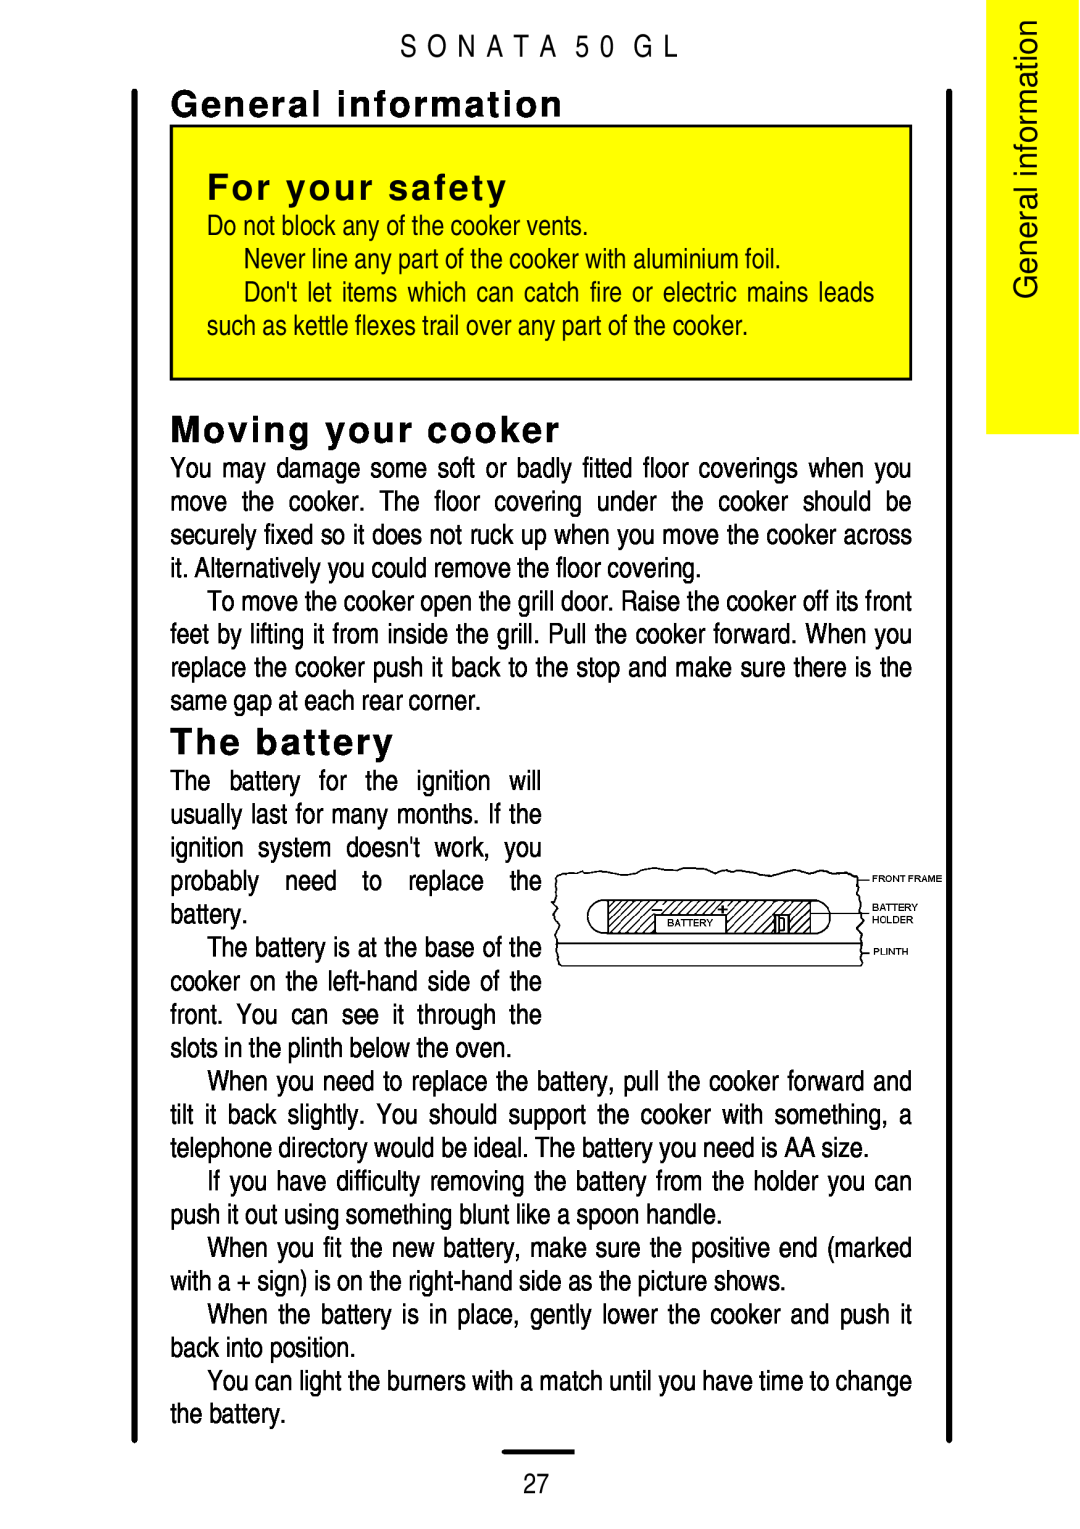 Electrolux General information For your safety, Moving your cooker, The battery, S O N A T A 5 0 G L 